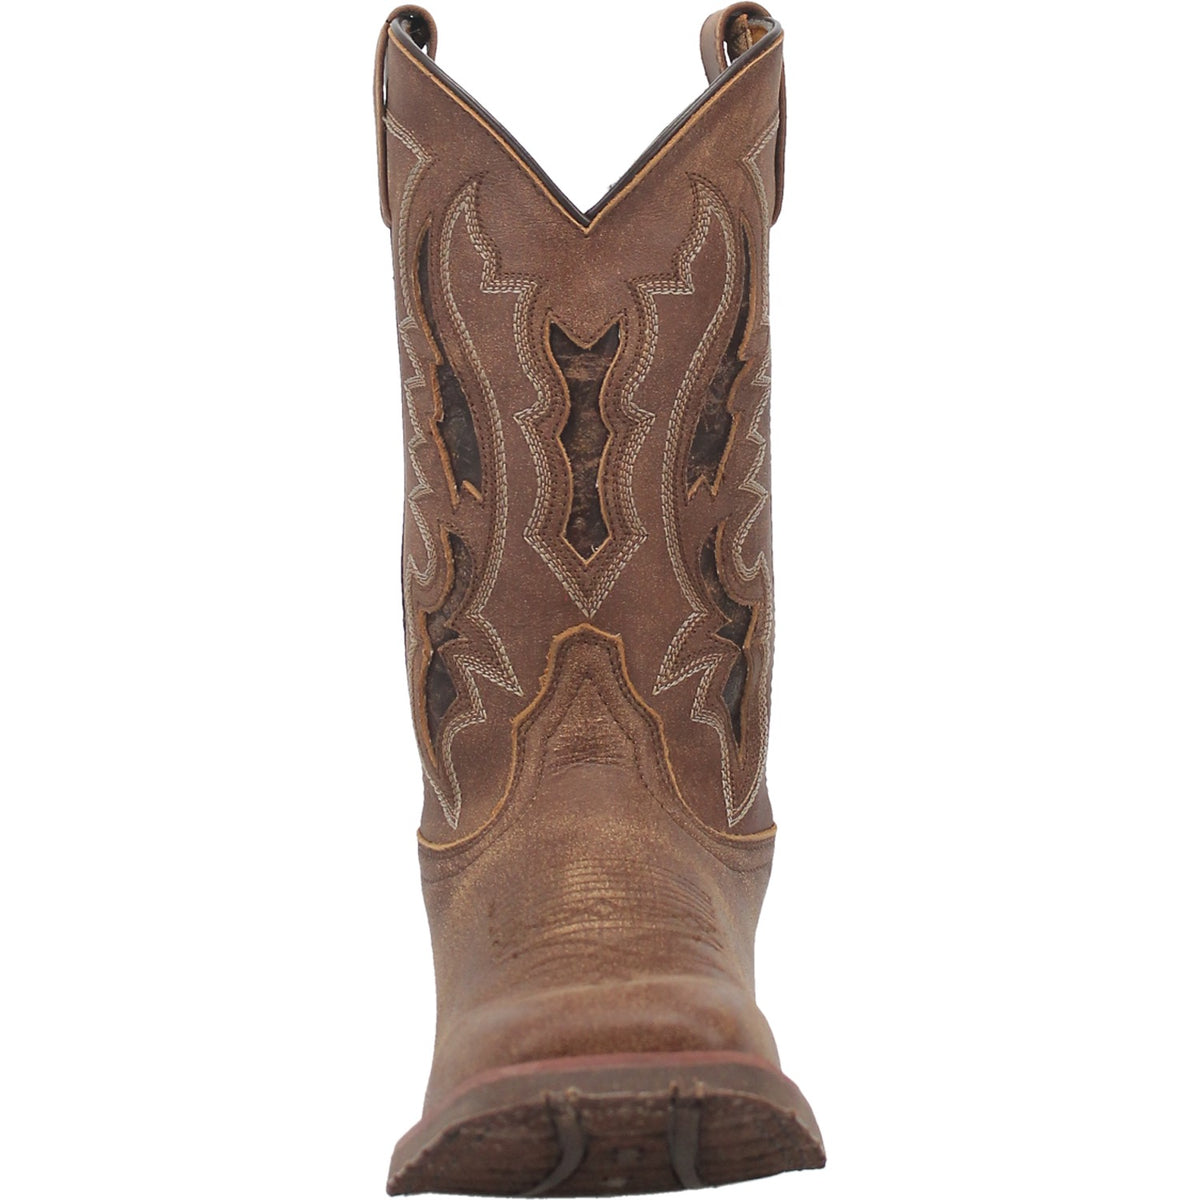 MARTIE LEATHER BOOT Cover